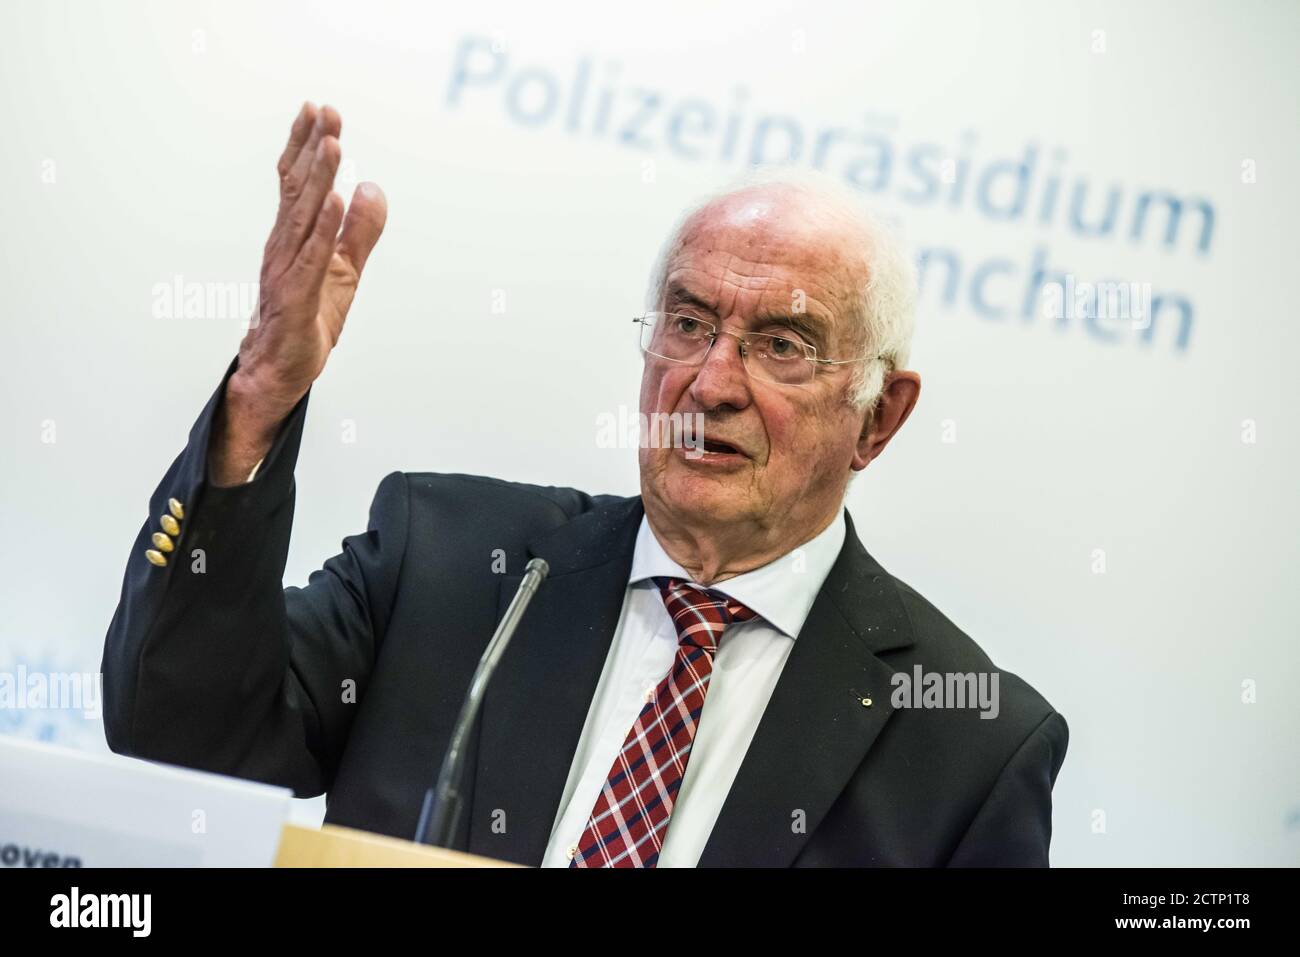 Munich, Bavaria, Germany. 24th Sep, 2020. Author and terror expert ROLF TOPHAVEN.Â Bavarian Interior Minister Joachim Herrmann introduced the new bookÂ ''Islamischer Staat: Geschlagen, nicht besiegt'' (''Islamic State: Beaten, but Not Defeated'') by Dr. Daniel Holz andÂ terrorism expert Rolf Tophoven at the PolizeipraesidiumÂ Munich.Â The trio engaged in aÂ discussion of the Islamic State (IS, ISIS) in an overview, how IS' methodology has changed over the years, and how its terrorist network attempts to spread its influence in the modern era. Credit: Sachelle Babbar/ZUMA Wire/Alamy Live News Stock Photo